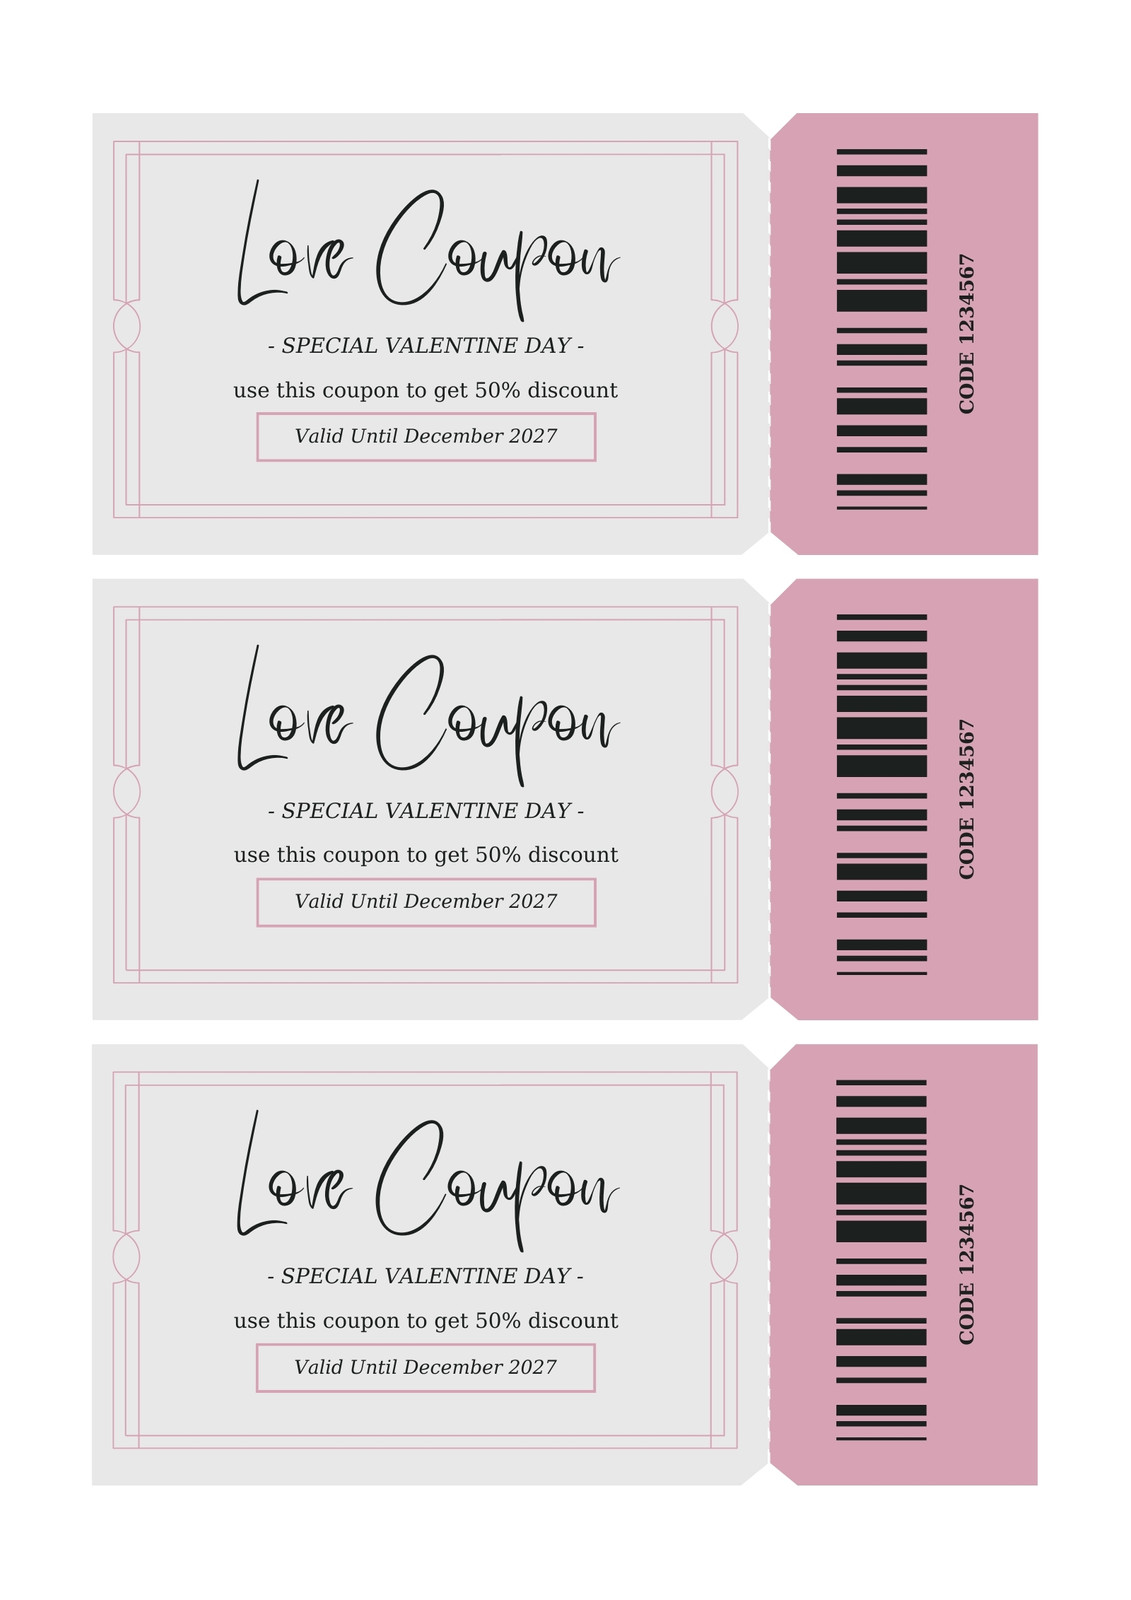 FREE Coupon Templates & Examples